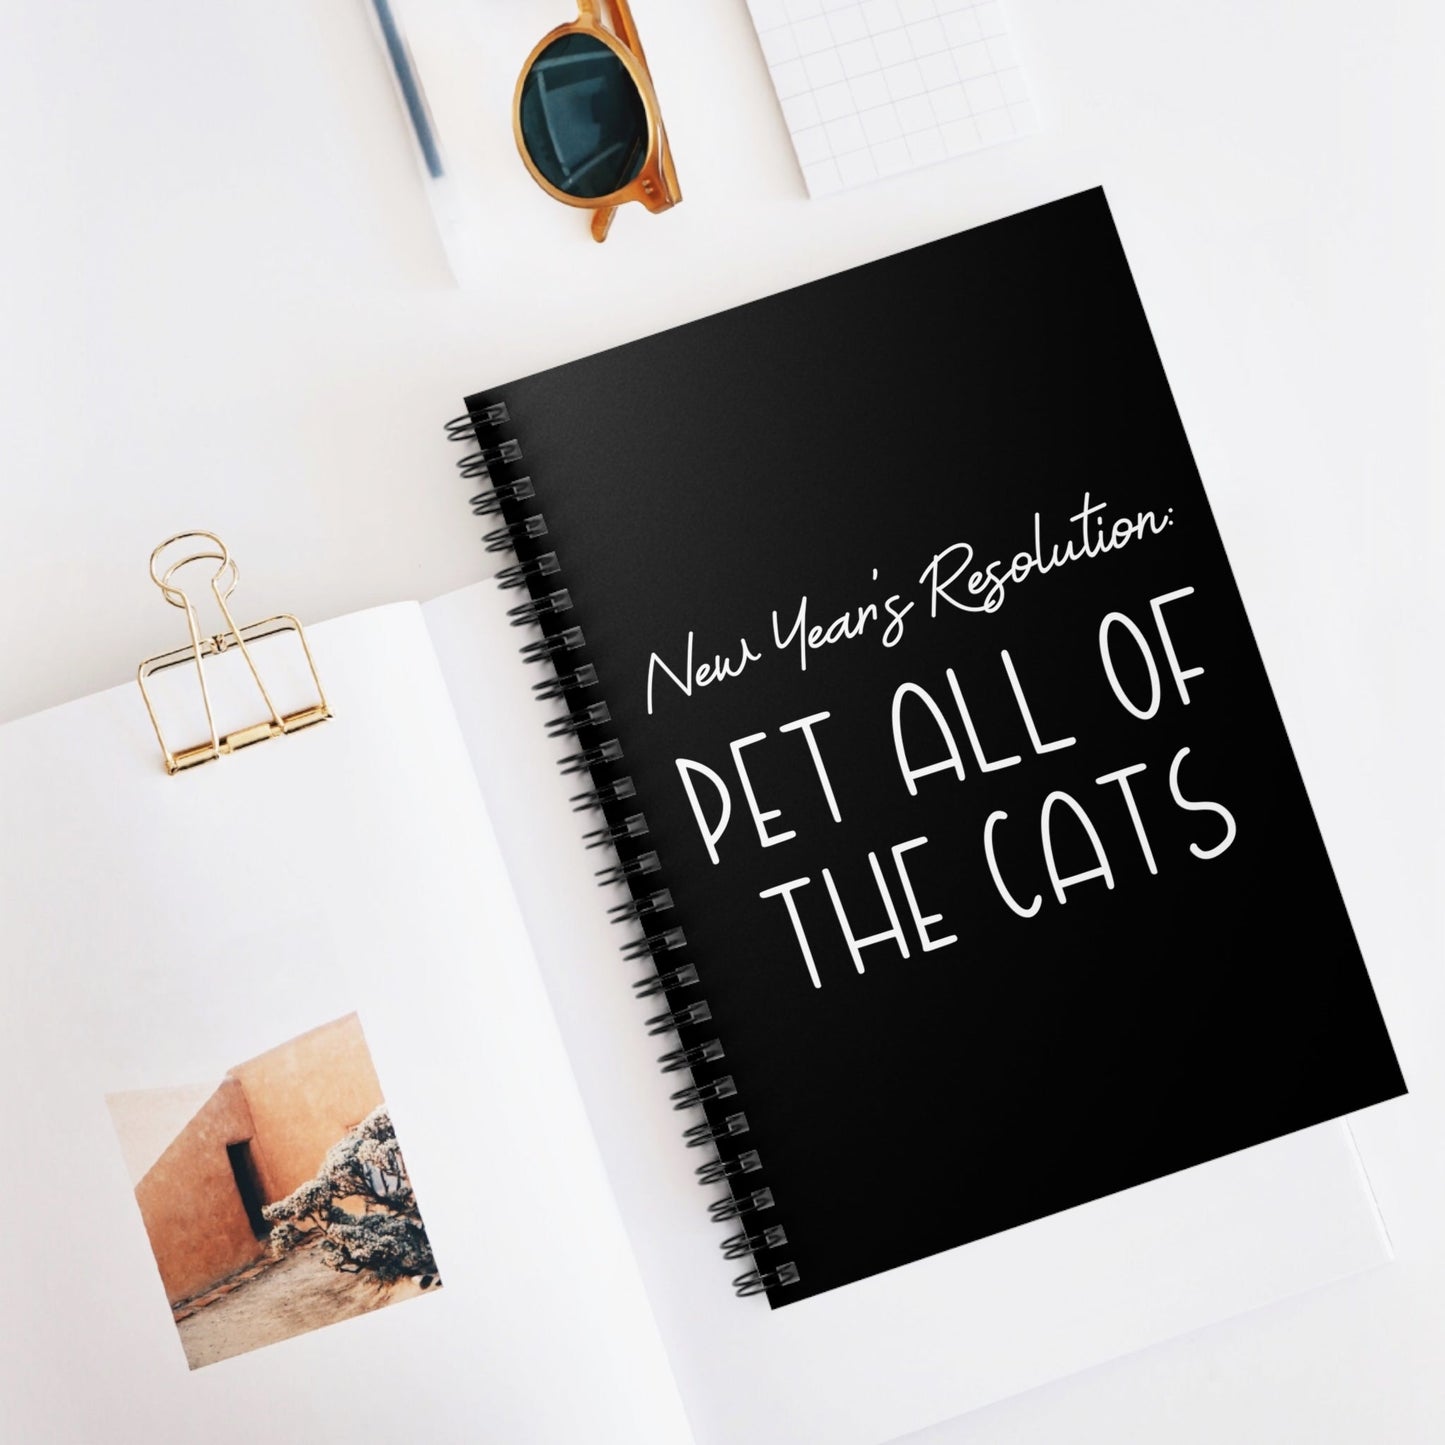 New Year's Resolution: Pet All Of The Cats | Notebook - Detezi Designs-10380407094498697770